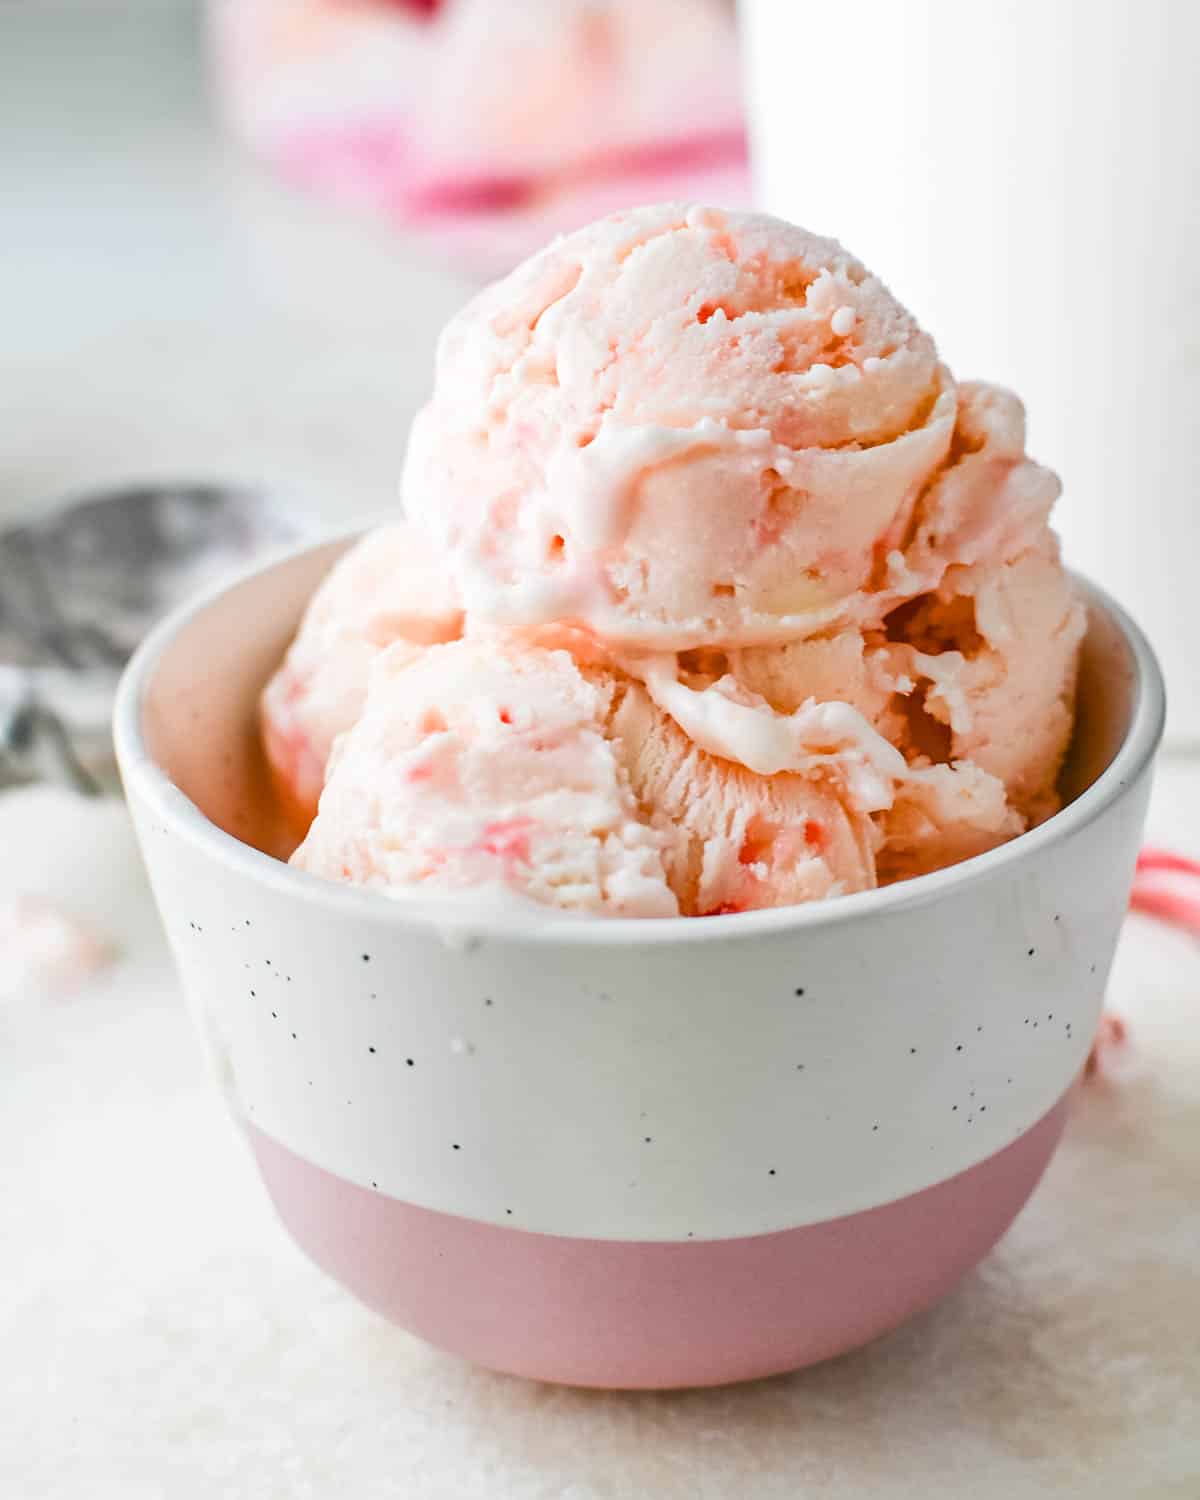 Serving a dish of peppermint ice cream.